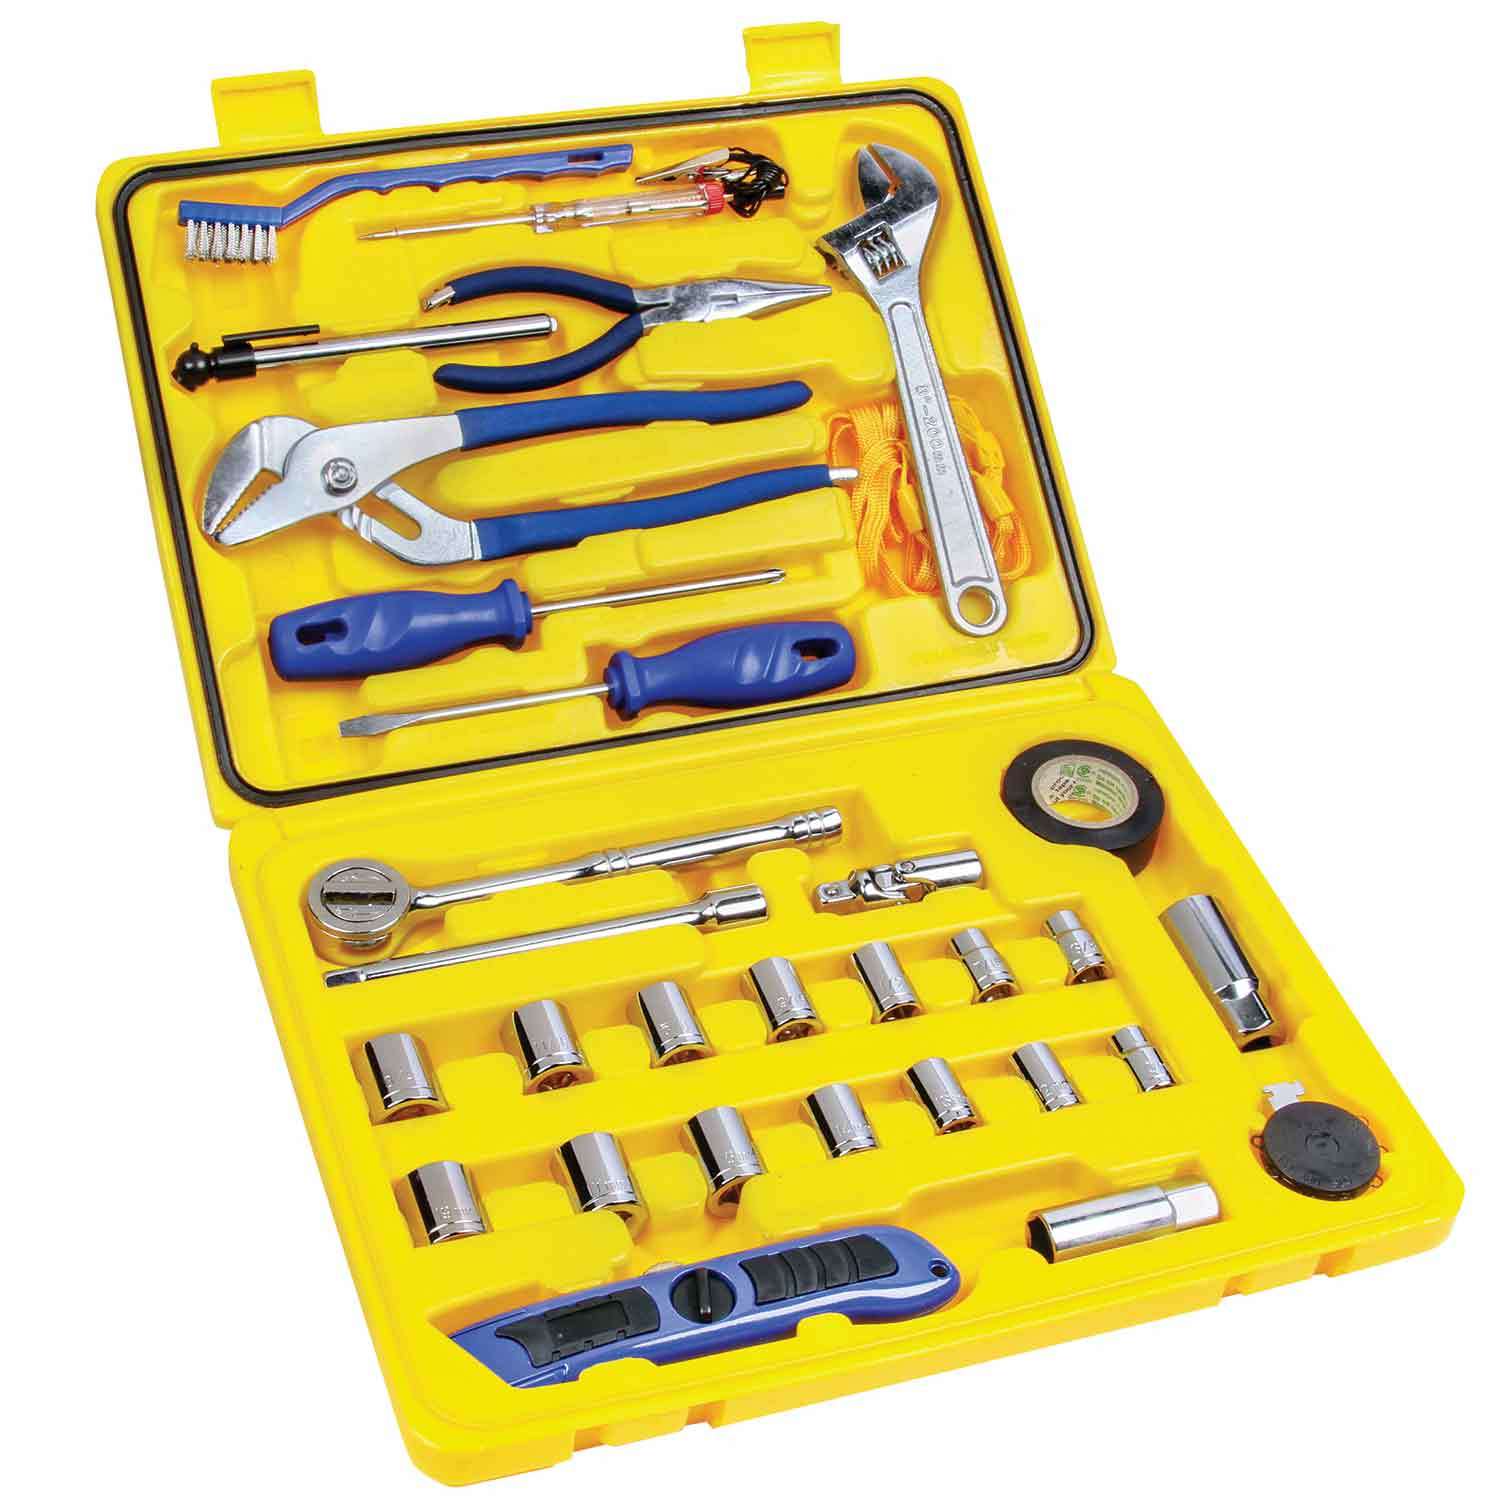  Home Marine Automotive Electrical Tool Kit Set with